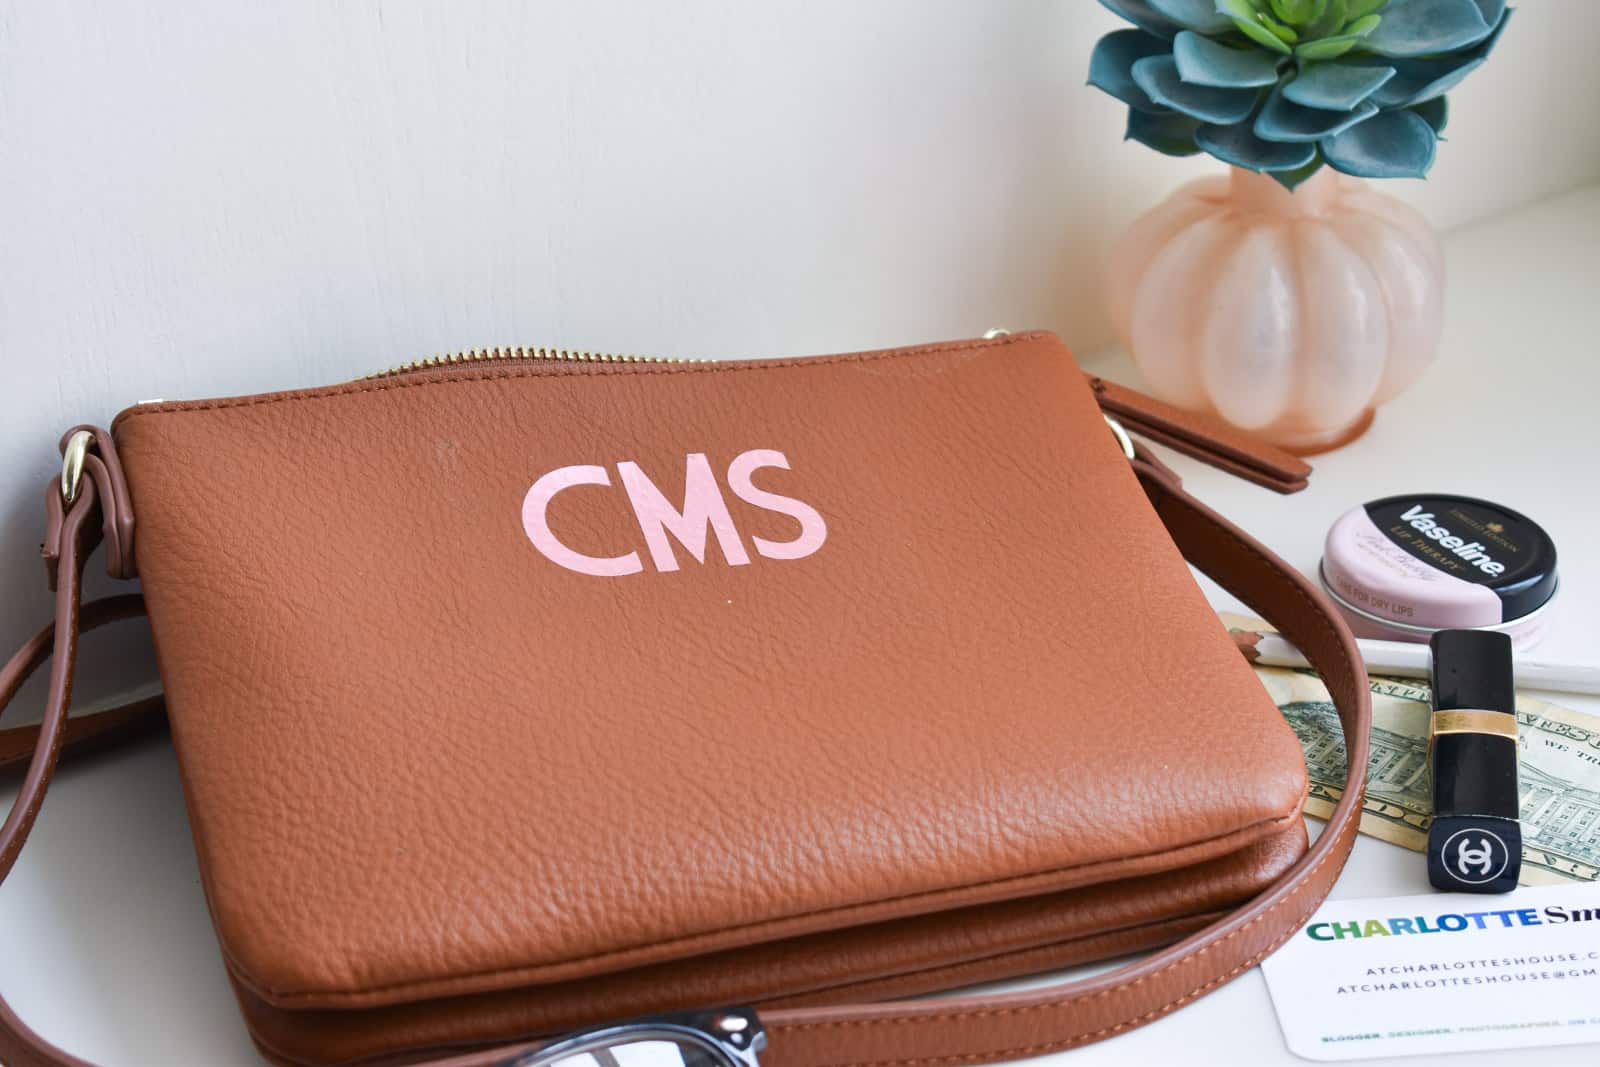 make your own metallic monogrammed leather bag